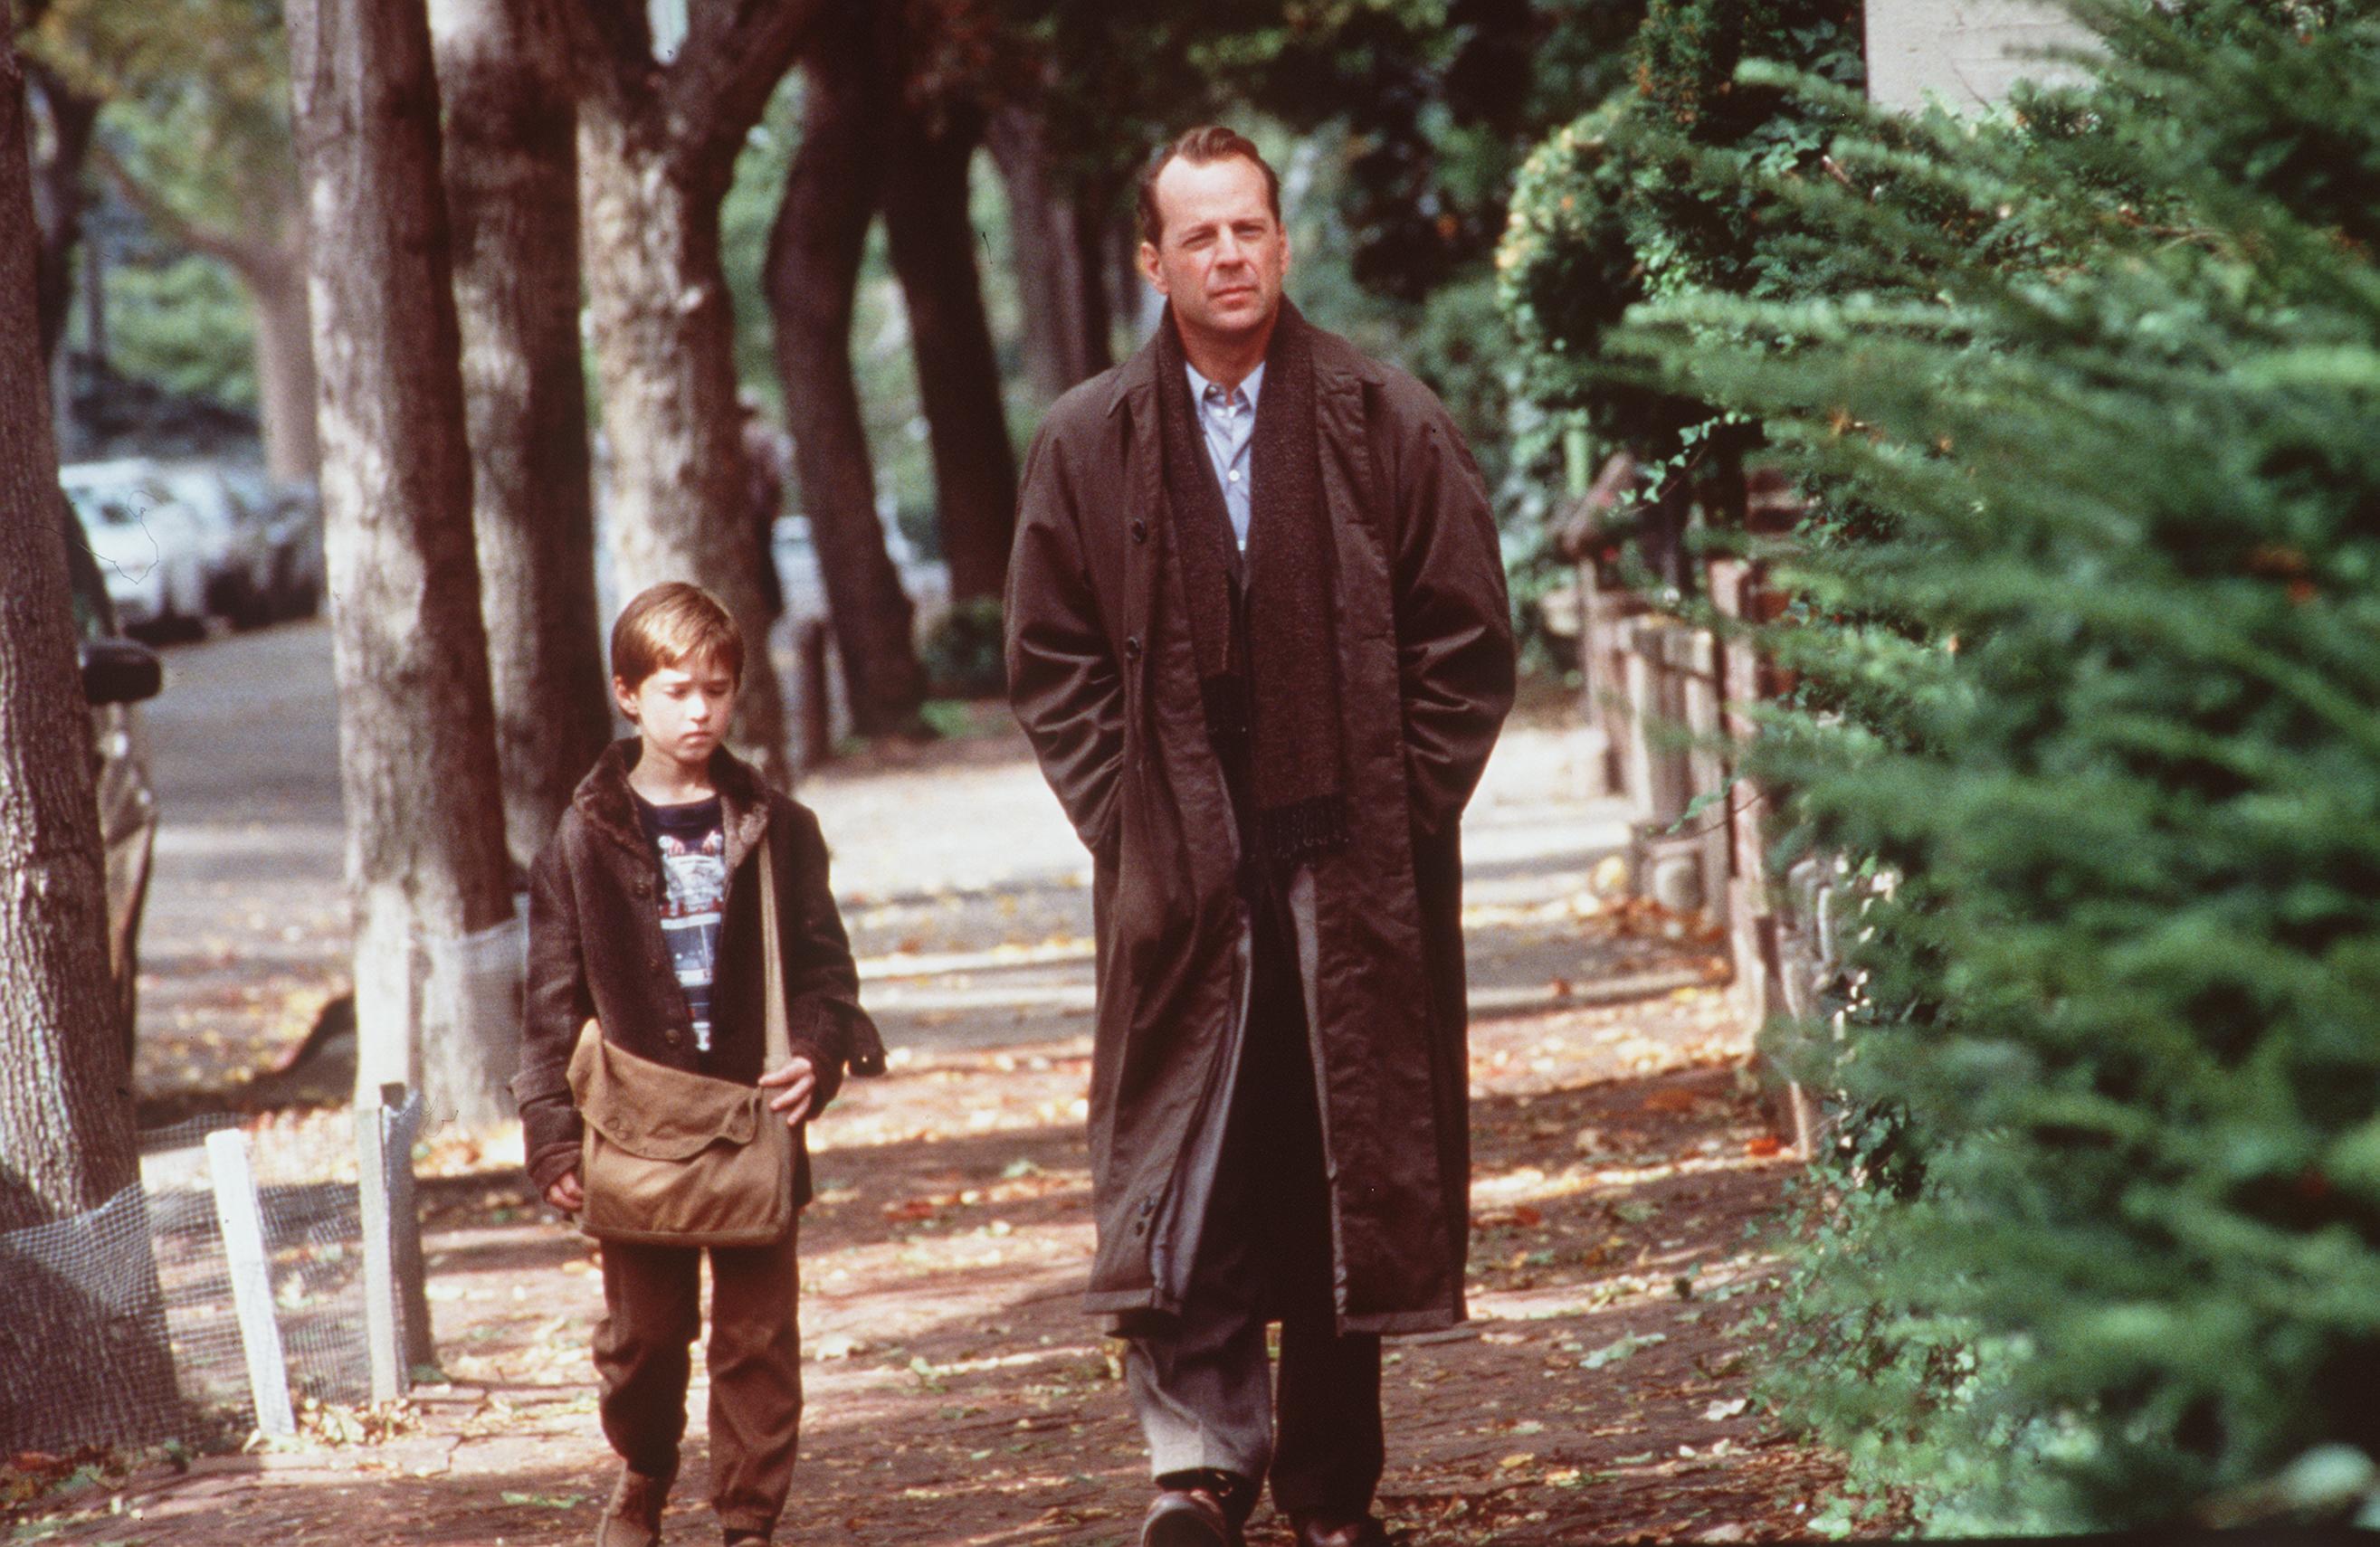 Child star and Bruce Willis on the set of "The Sixth Sense," 1999 | Source: Getty Images